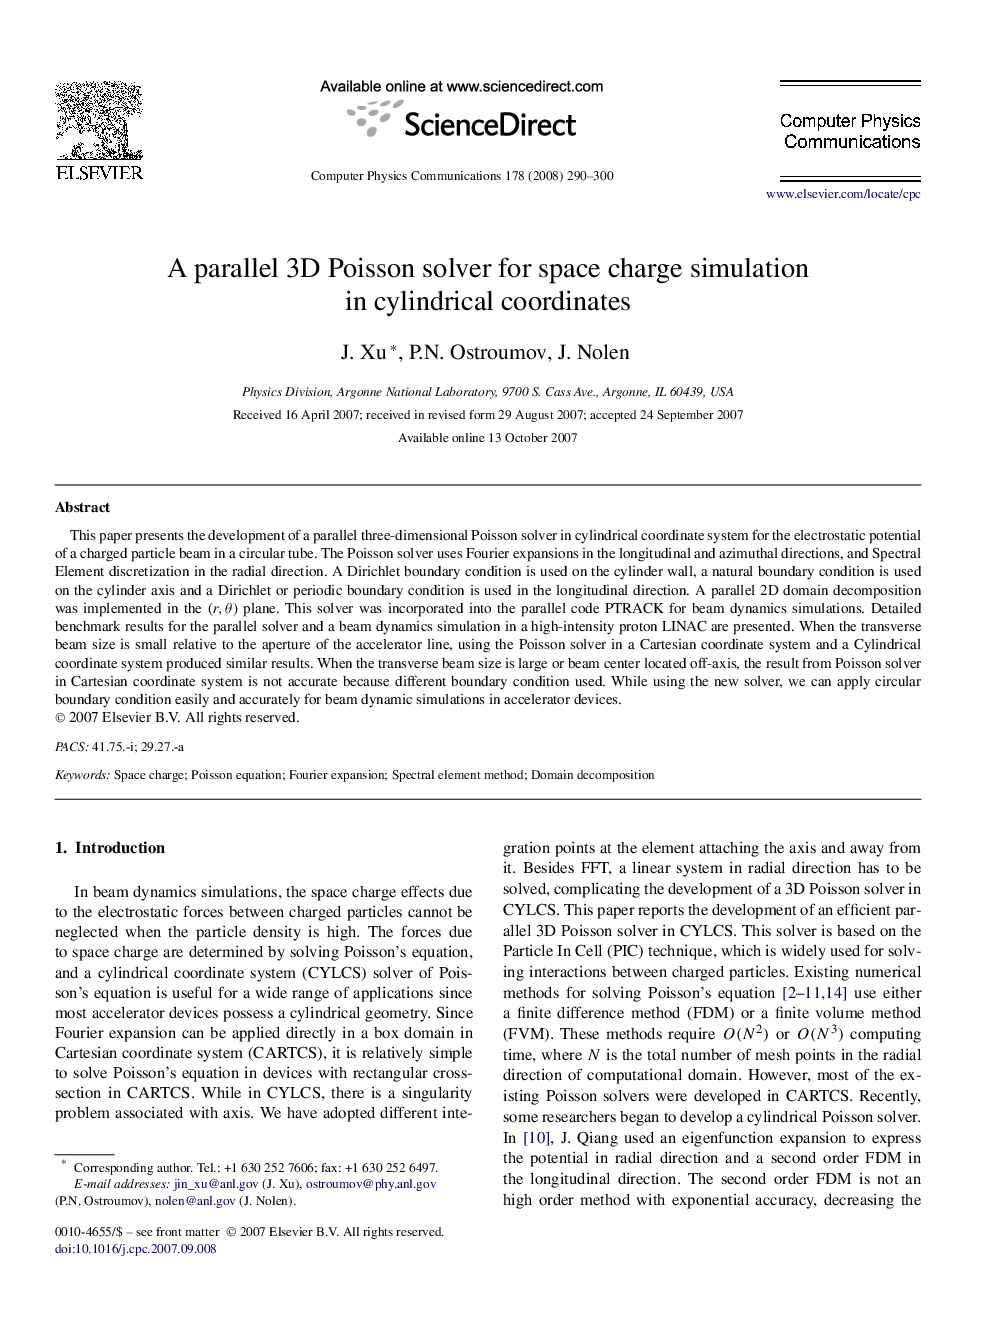 A parallel 3D Poisson solver for space charge simulation in cylindrical coordinates